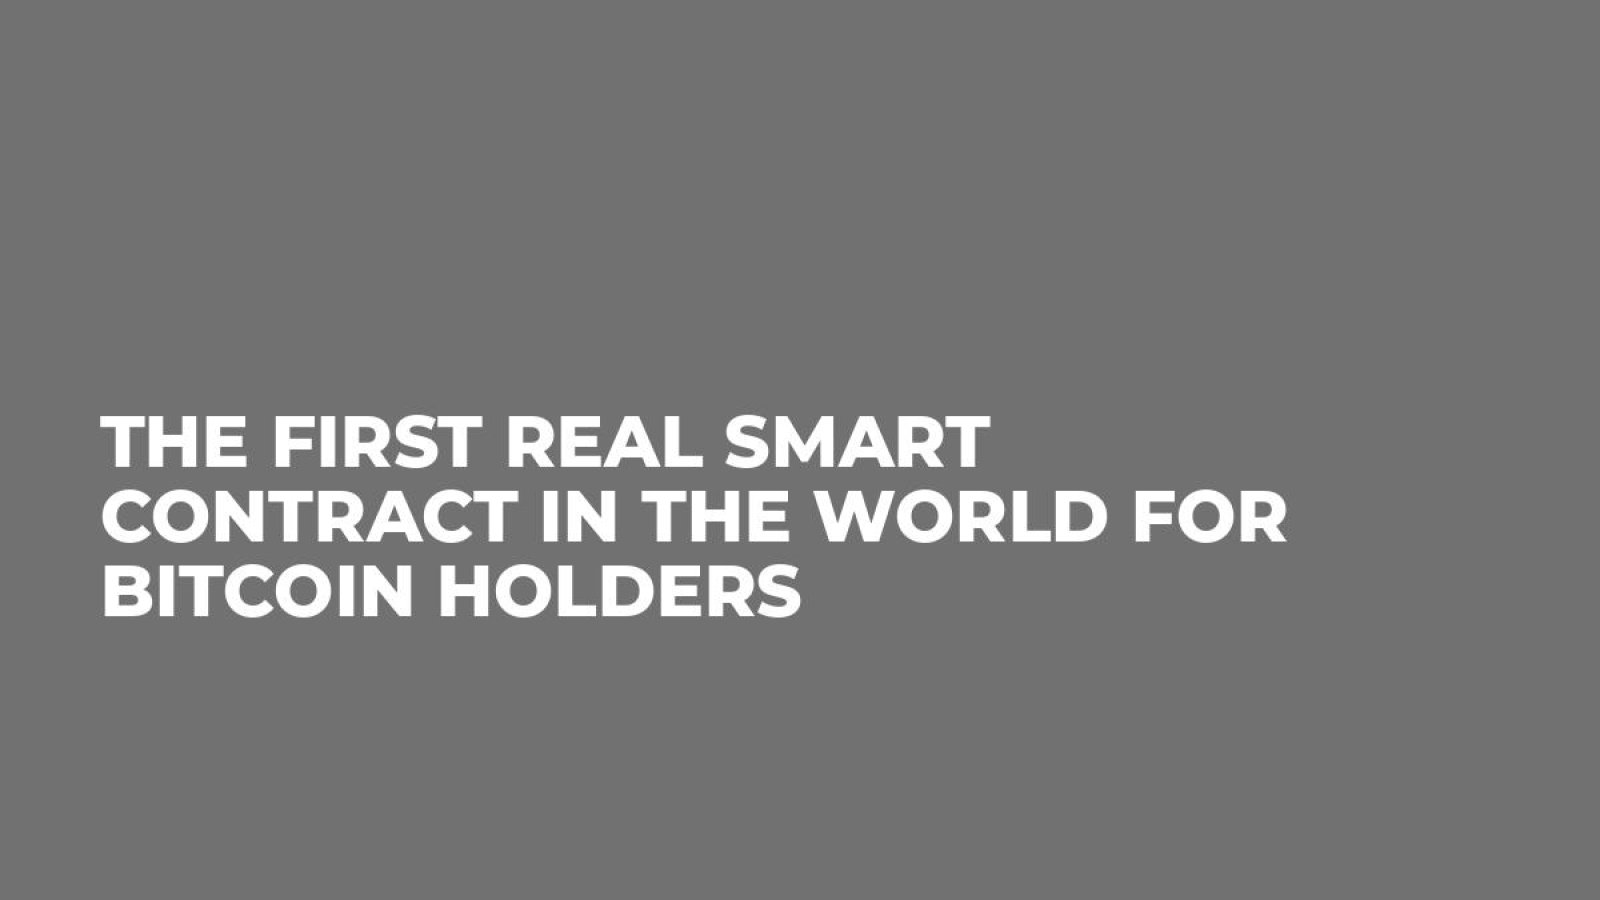 The First Real Smart Contract in the World for Bitcoin Holders